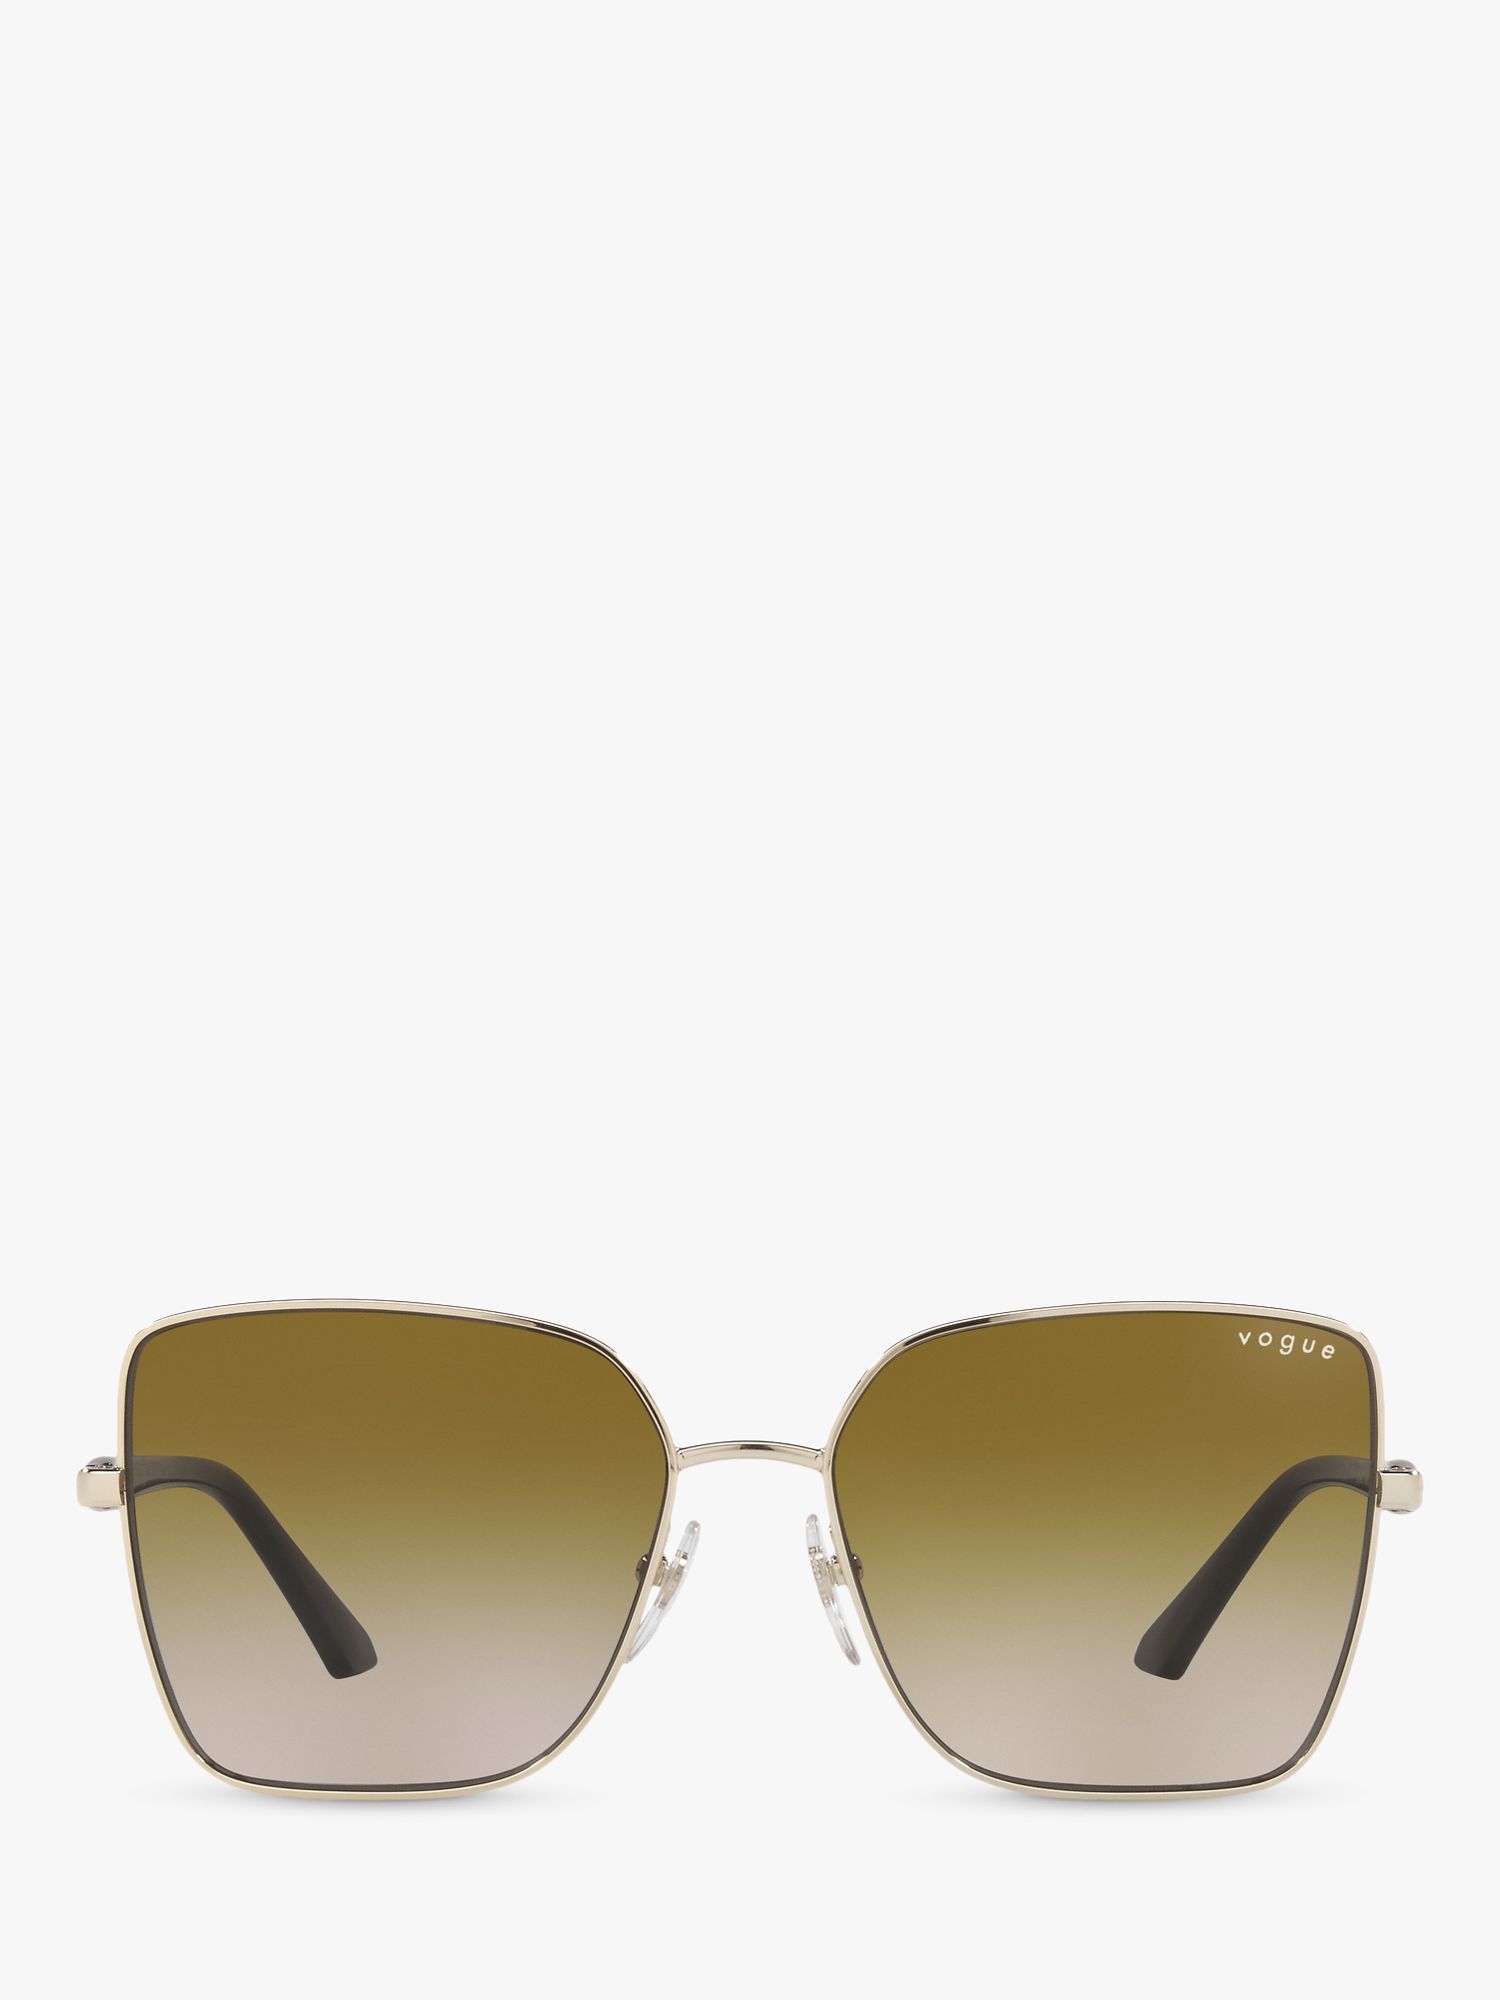 Vogue VO4199S Women's Butterfly Sunglasses, Pale Gold/Brown Gradient